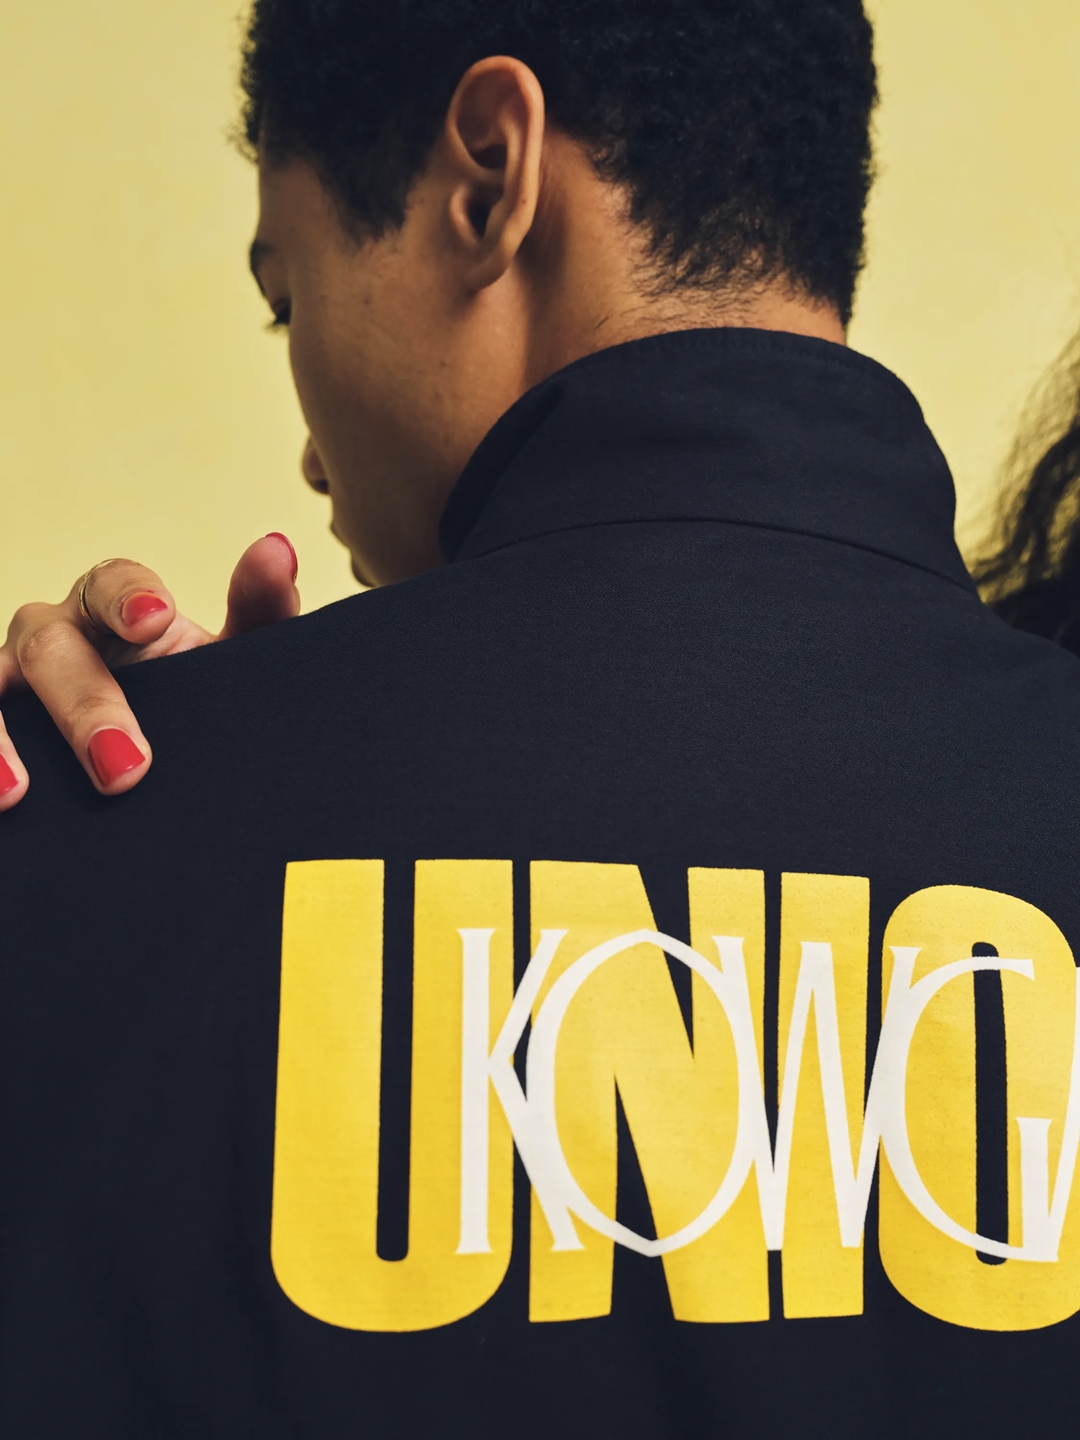 UNION × KOWGA “FOR HER FOR HIM” CAPSULE COLLECTIONが11/3 発売 (ユニオン コウガ)